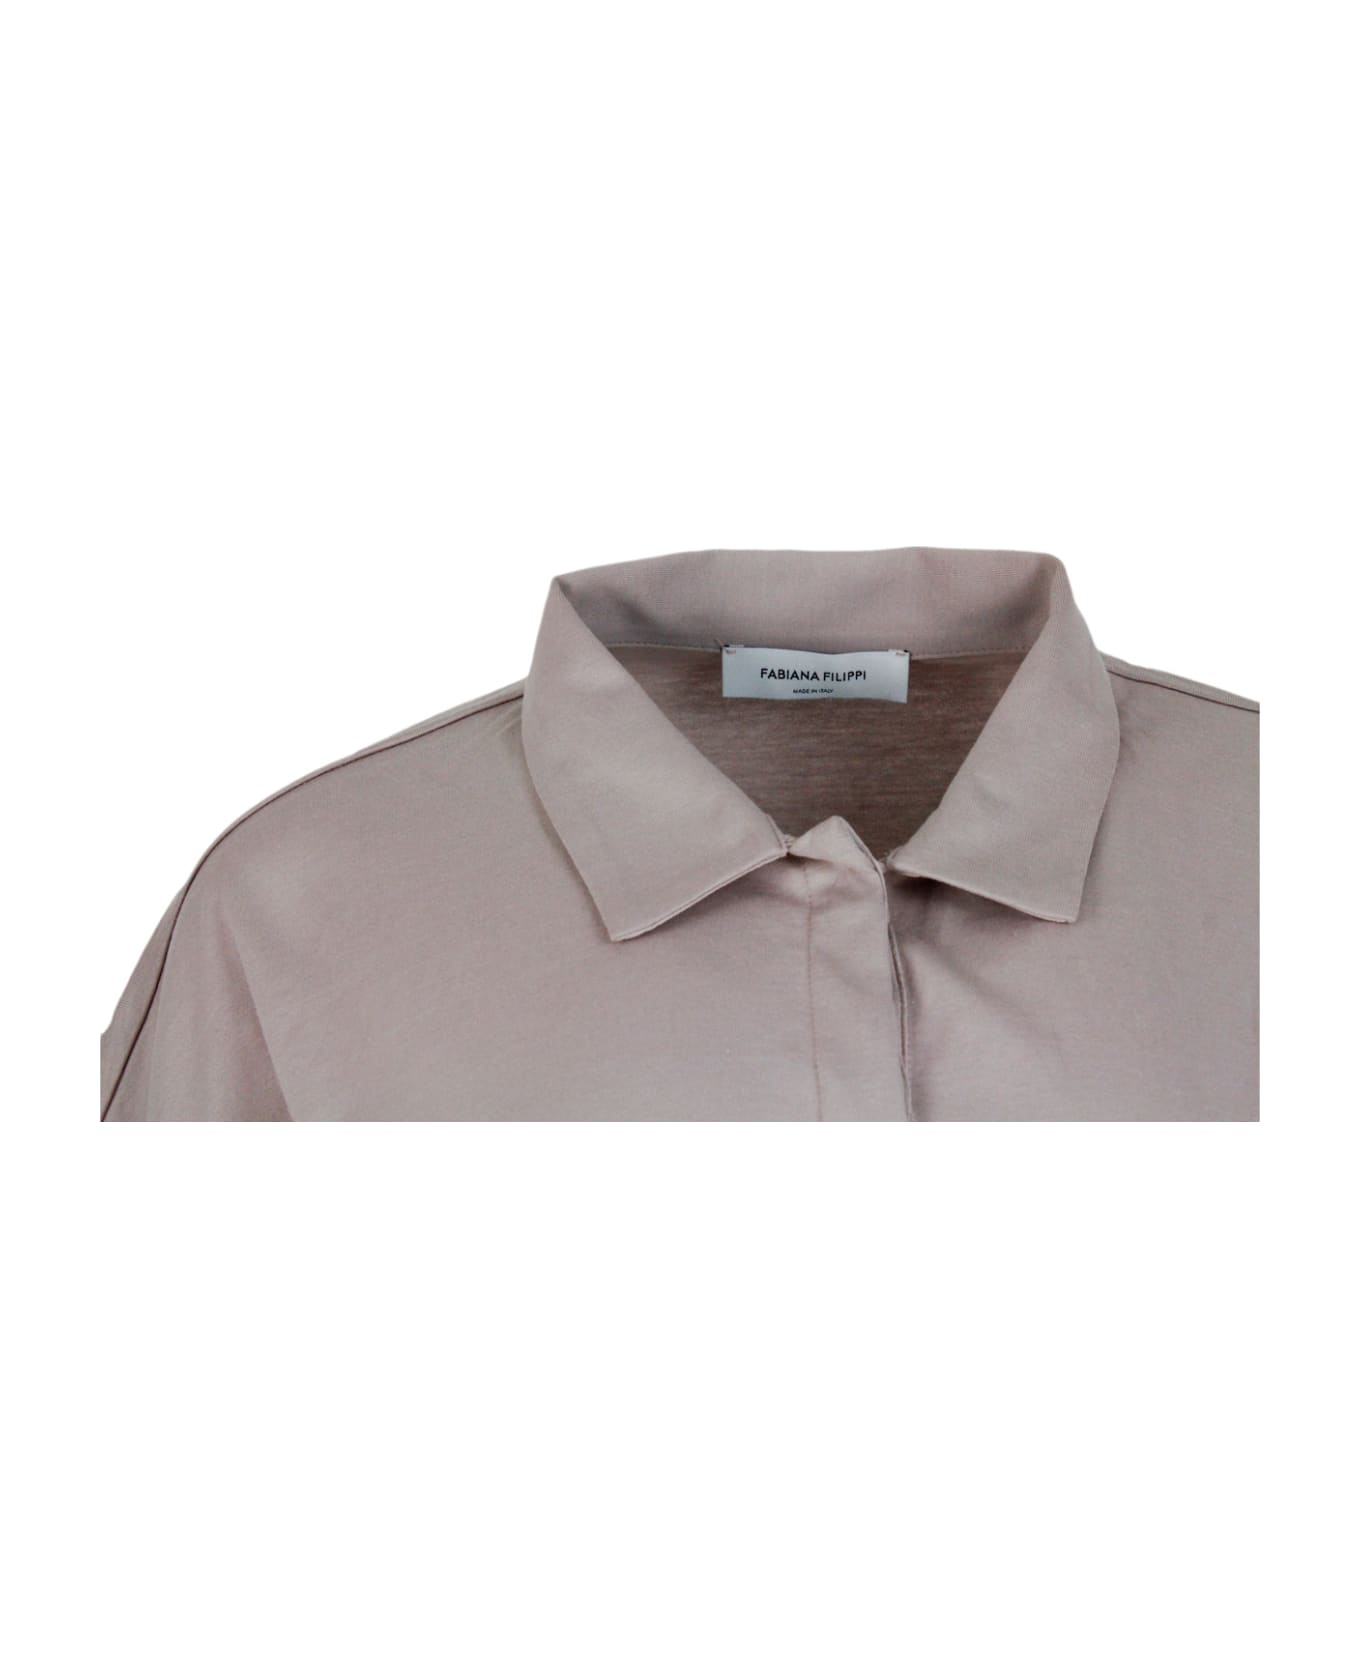 Fabiana Filippi Polo Shirt In Stretch Cotton Jersey With Short Sleeves And Cuffs Embellished With Jewels - Pink